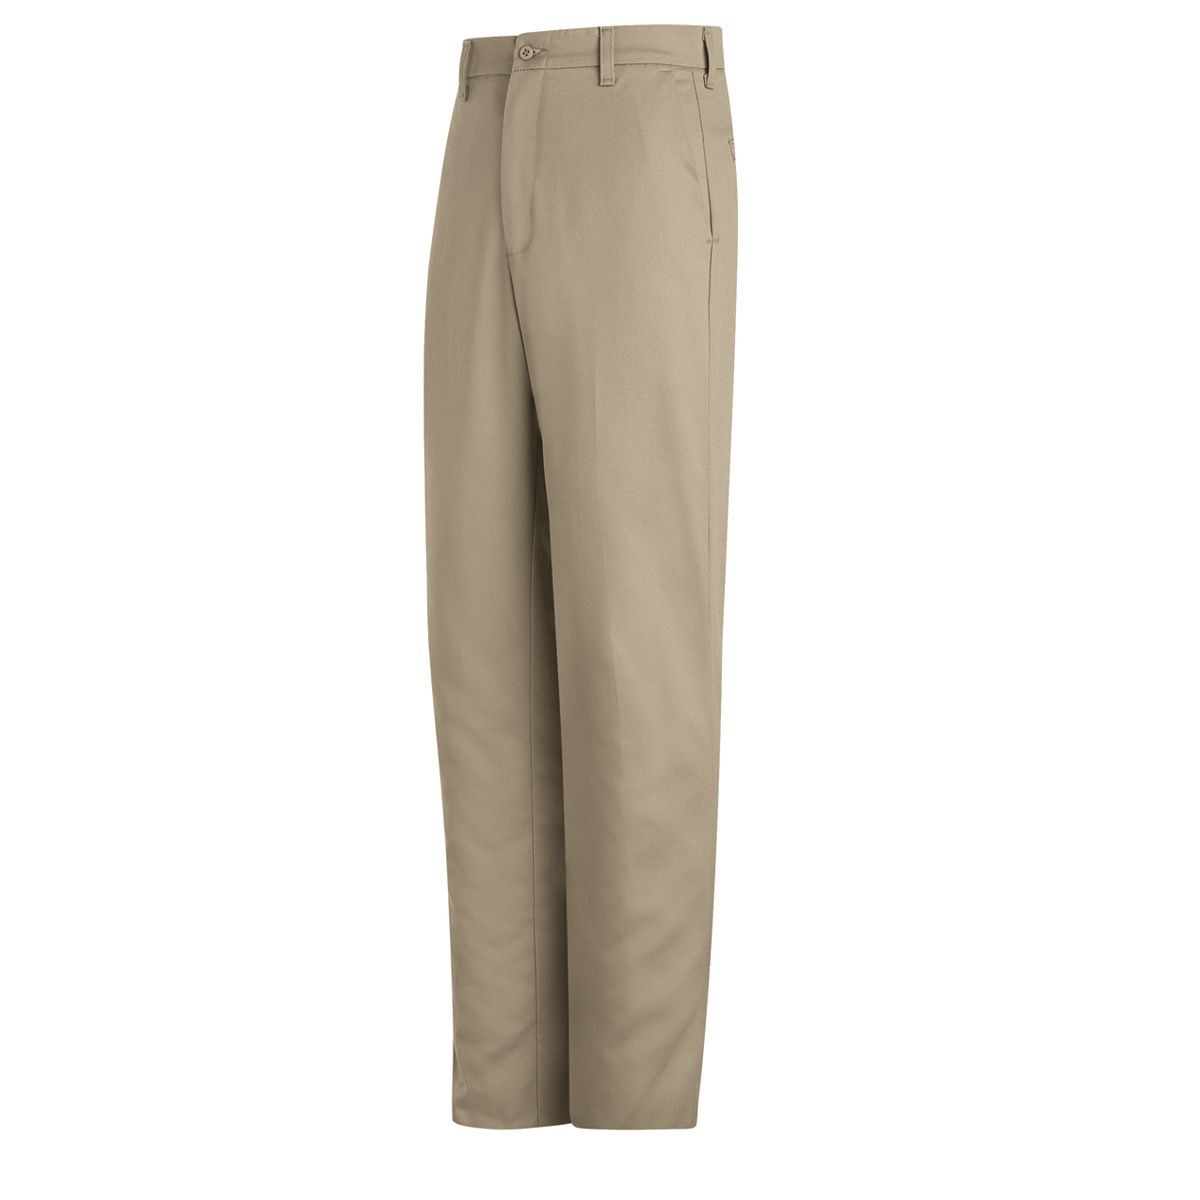 Airgas R30pew2kh3632 Bulwark 36 X 32 Khaki Excel Fr Twill Cotton Flame Resistant Work Pants With Button Closure